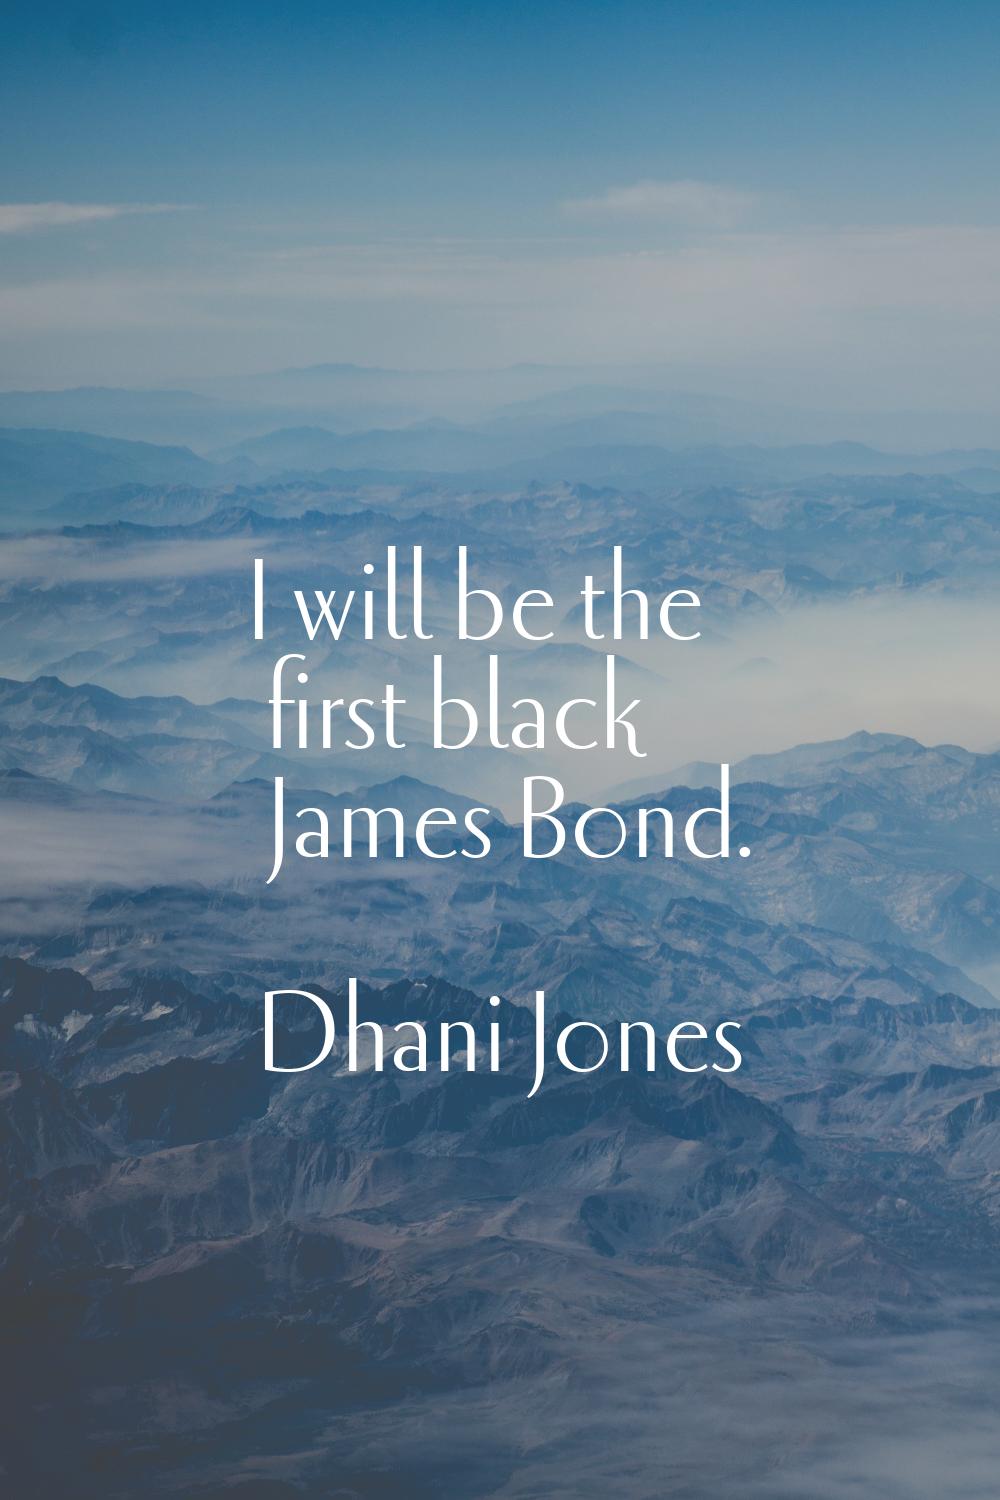 I will be the first black James Bond.